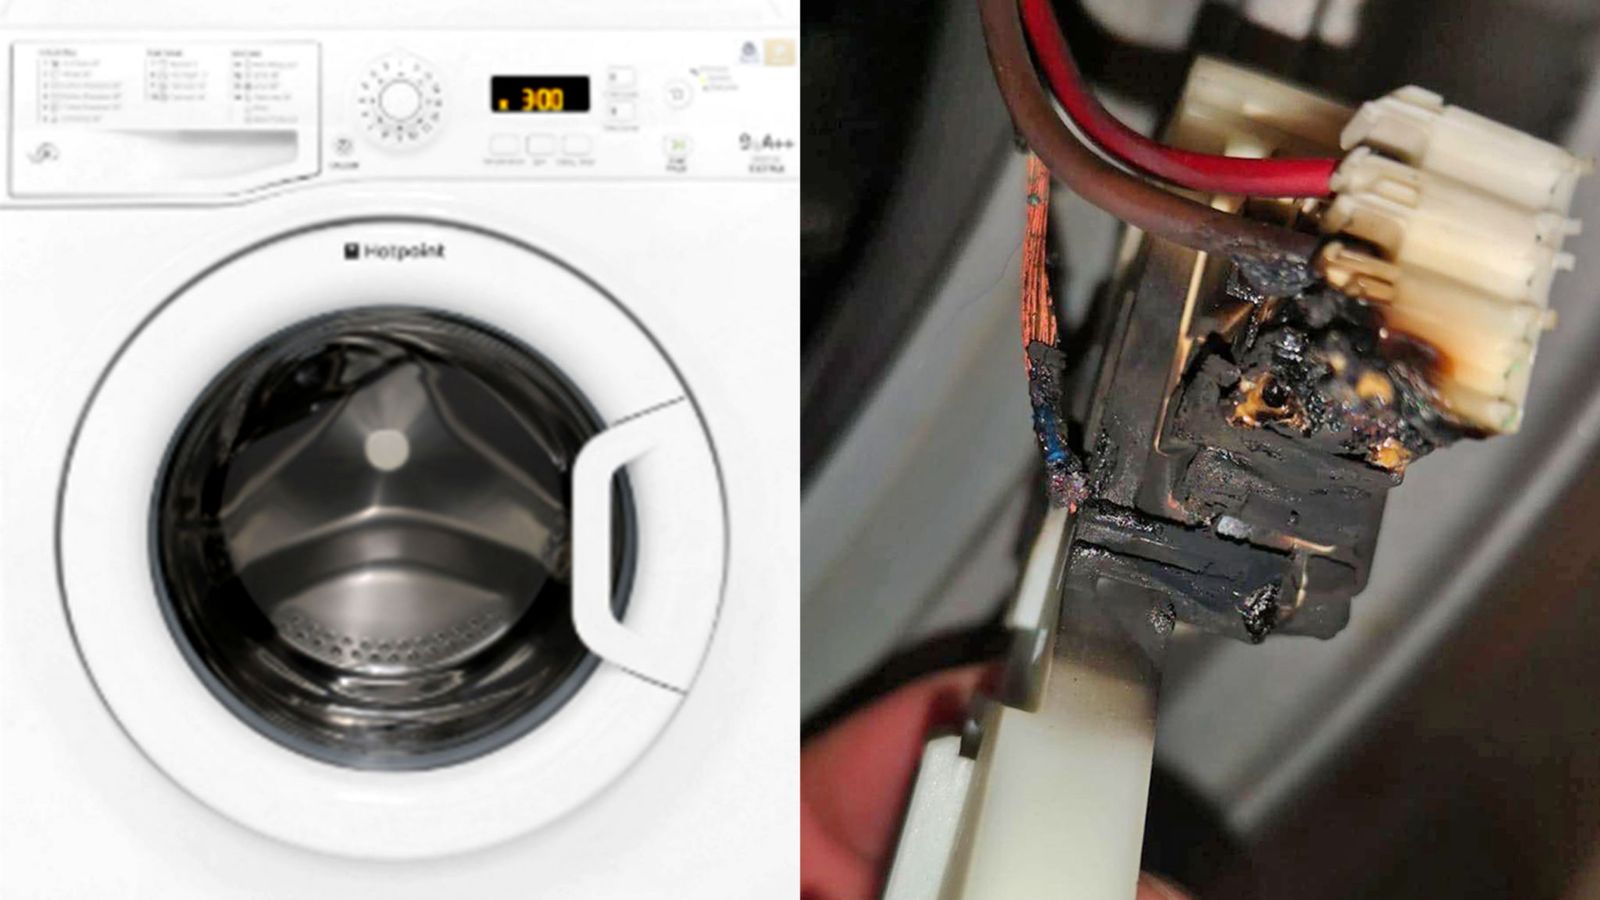 Washing machine recall is a concern for landlords… - https://roomslocal.co.uk/blog/washing-machine-recall-is-a-concern-for-landlords #machine #recall #concern #landlords